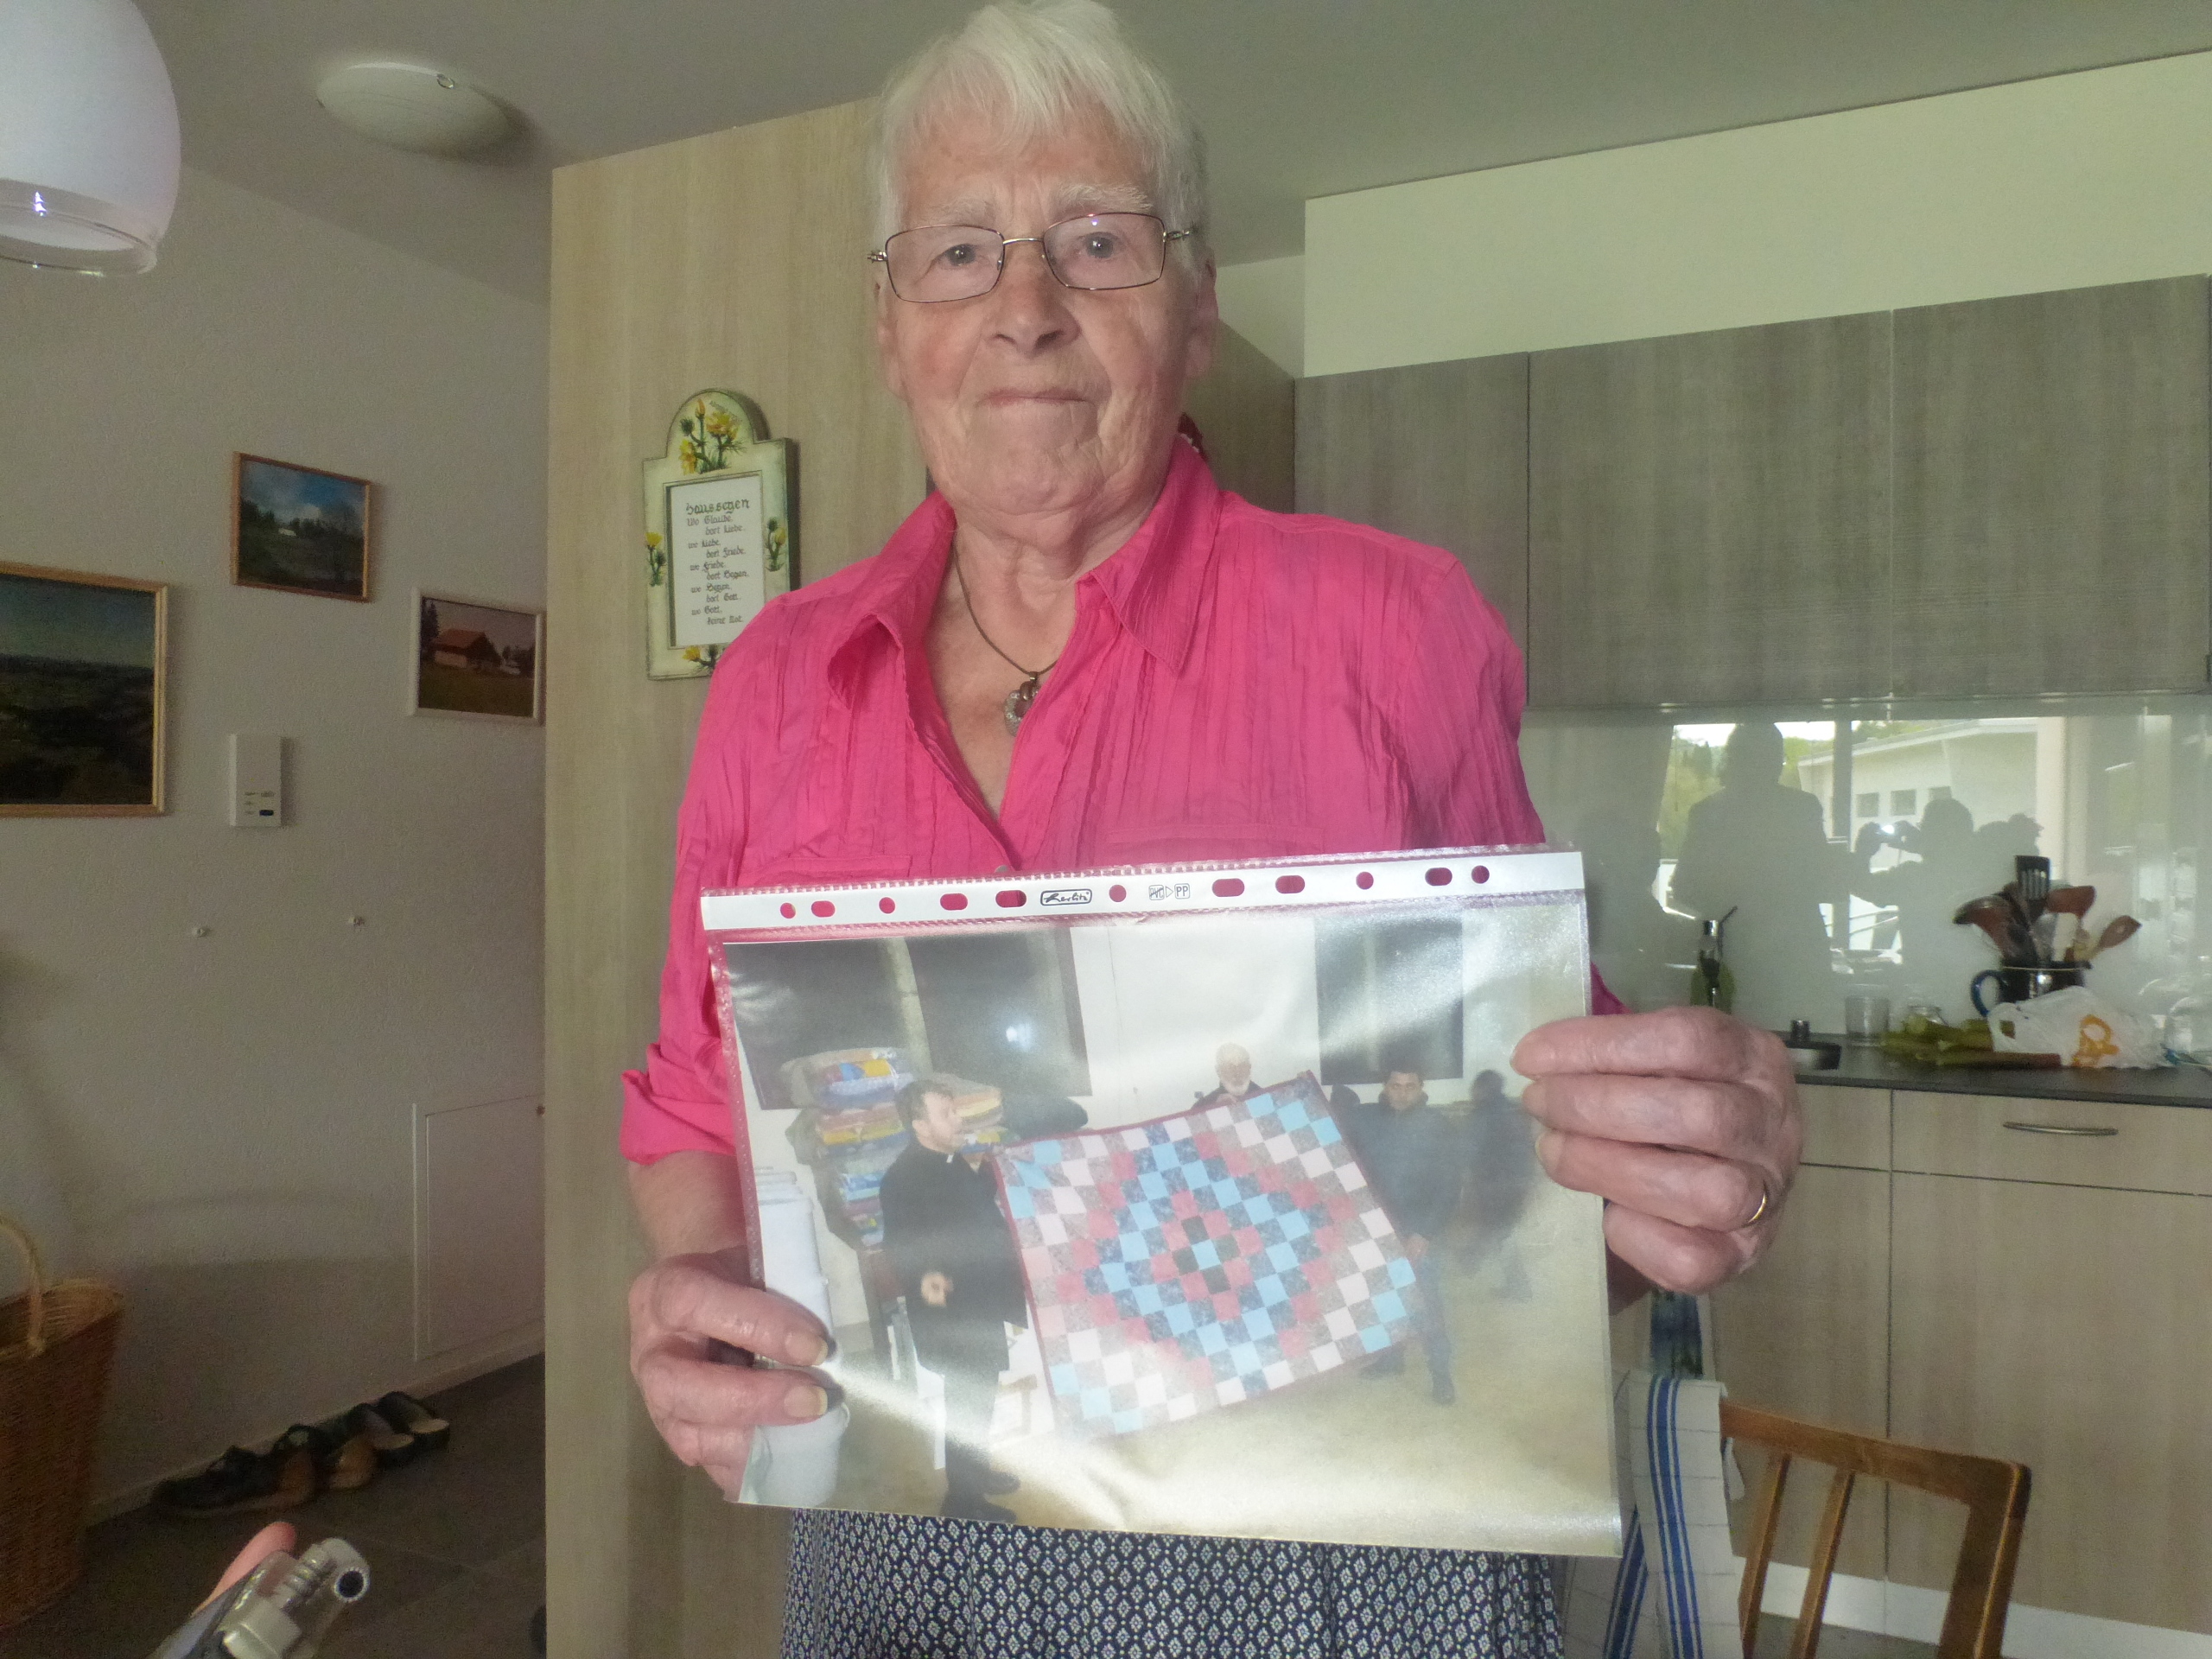 An older woman in a pink shirt holds a photo of people displaying a comforter